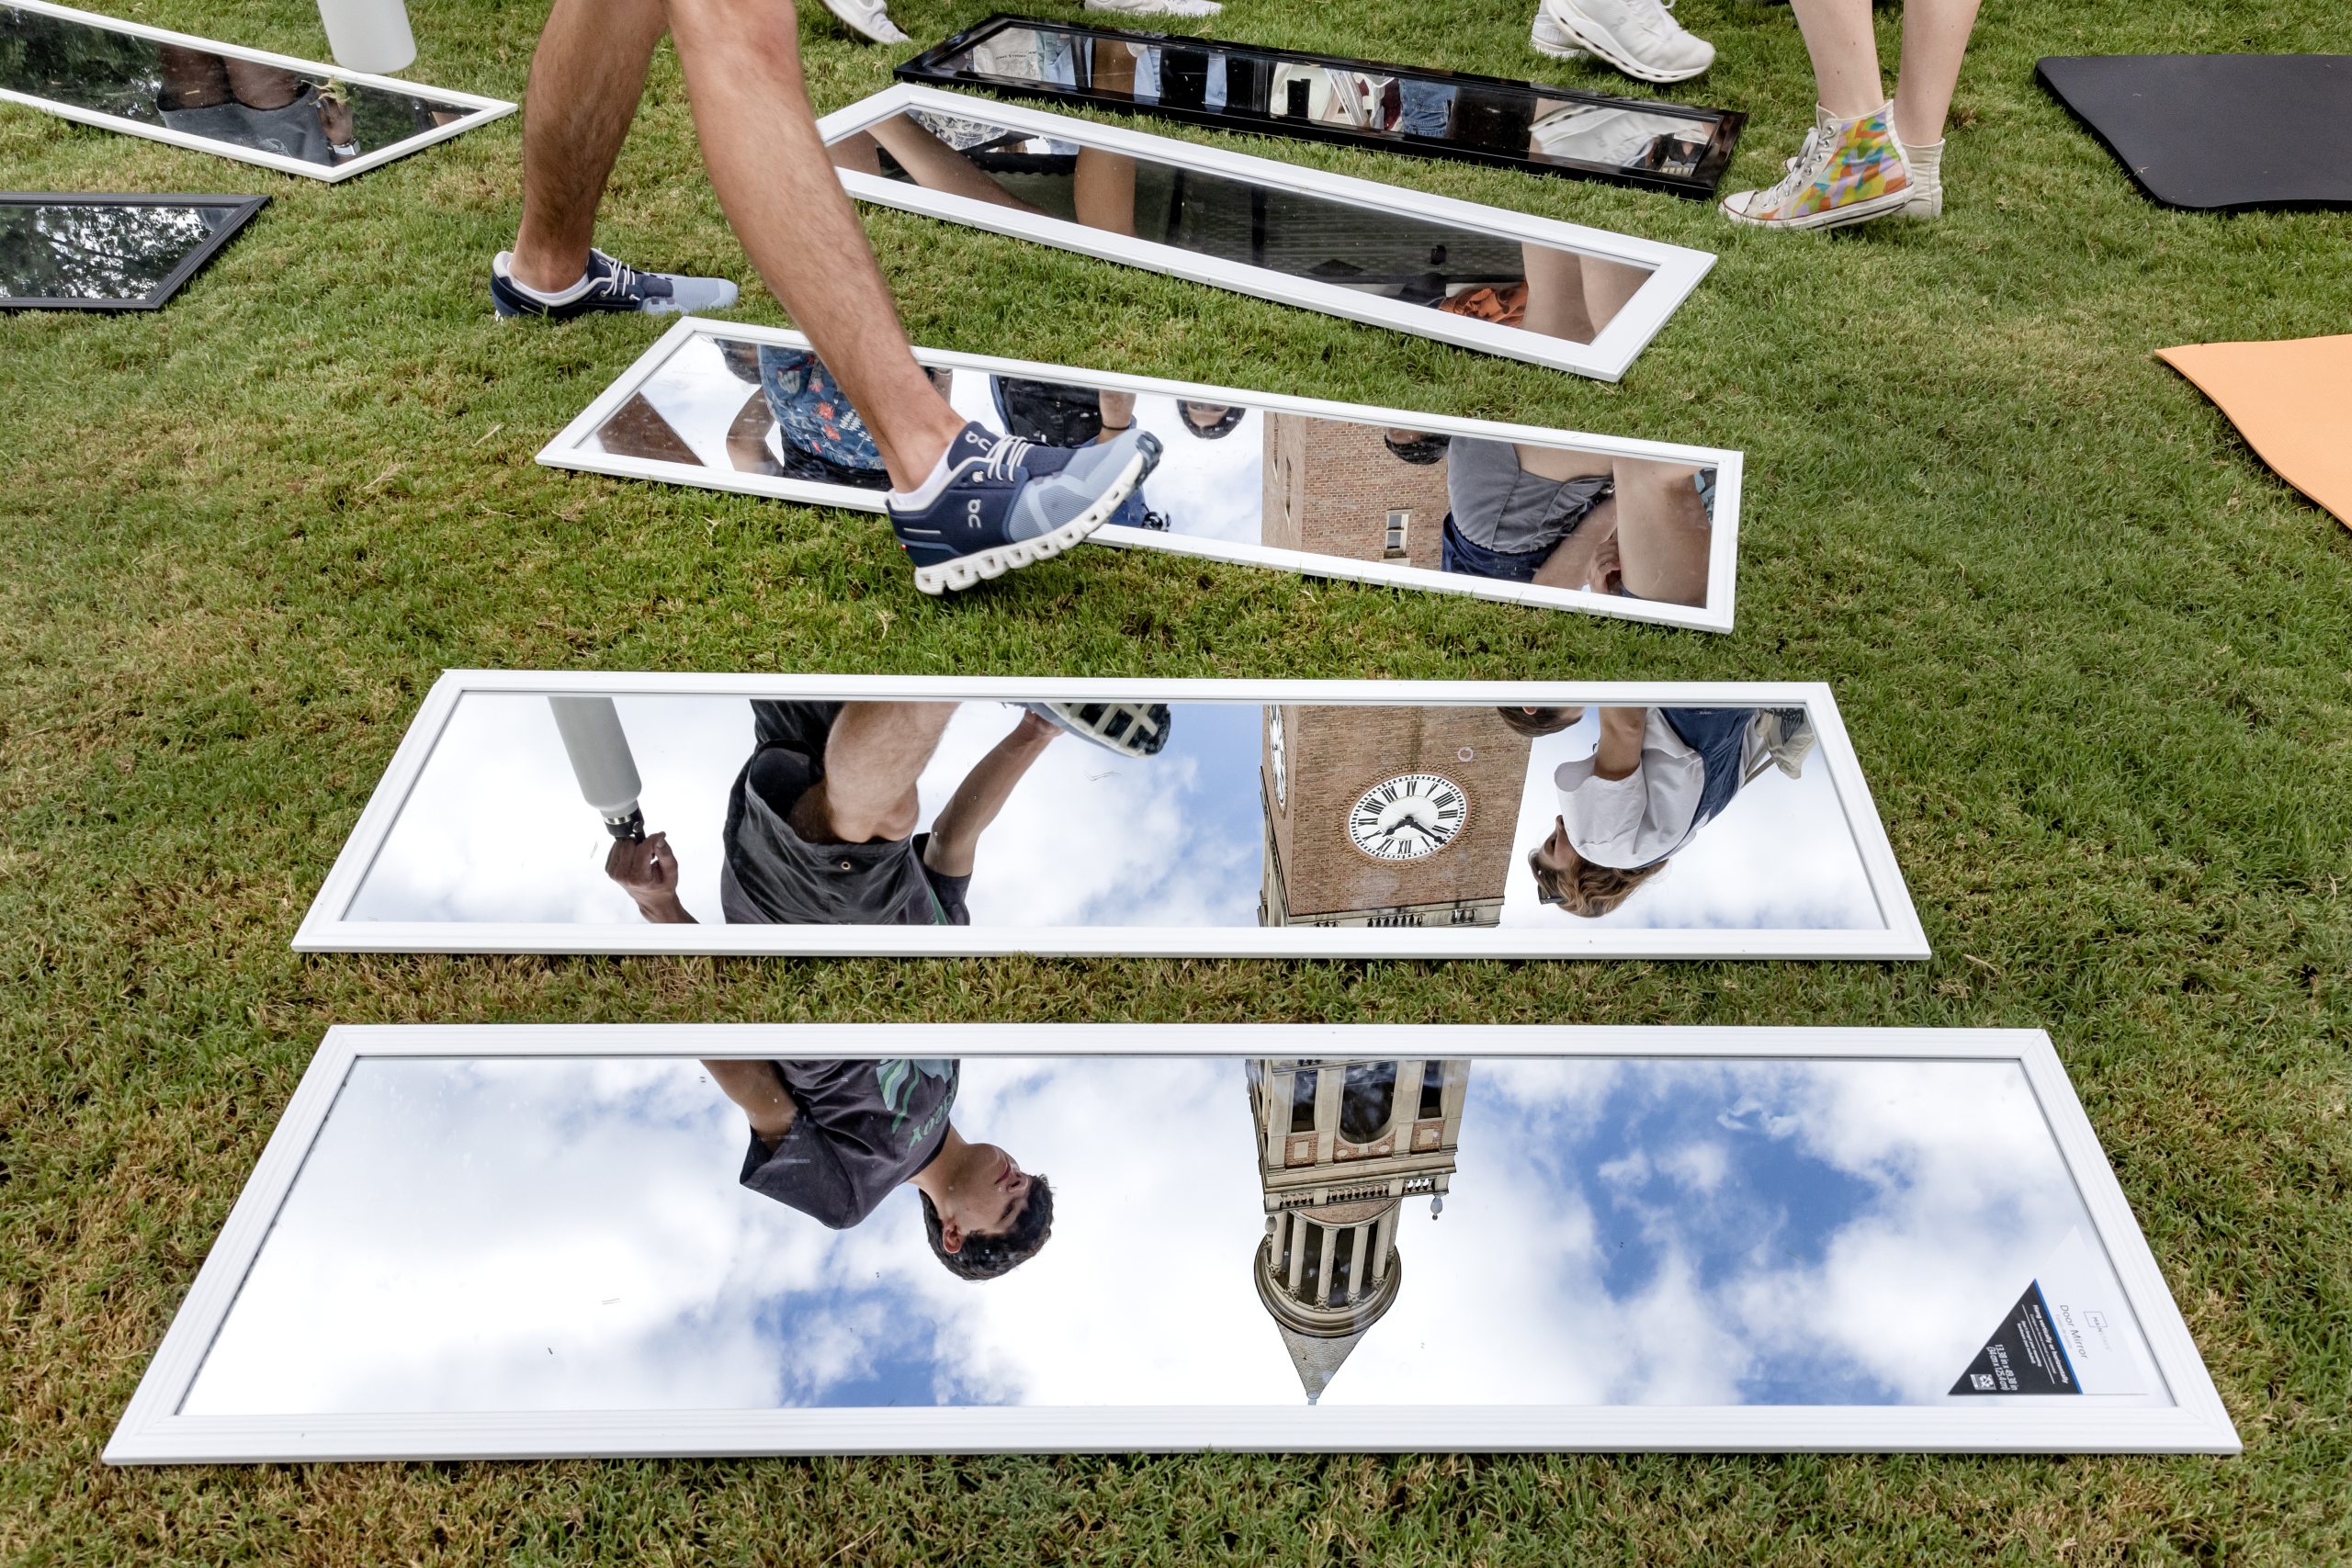 A person stepping around four mirrors sitting on a grass lawn. The reflection of the mirrors creates an upside down view of a bell tower on the campus of UNC-Chapel Hill.